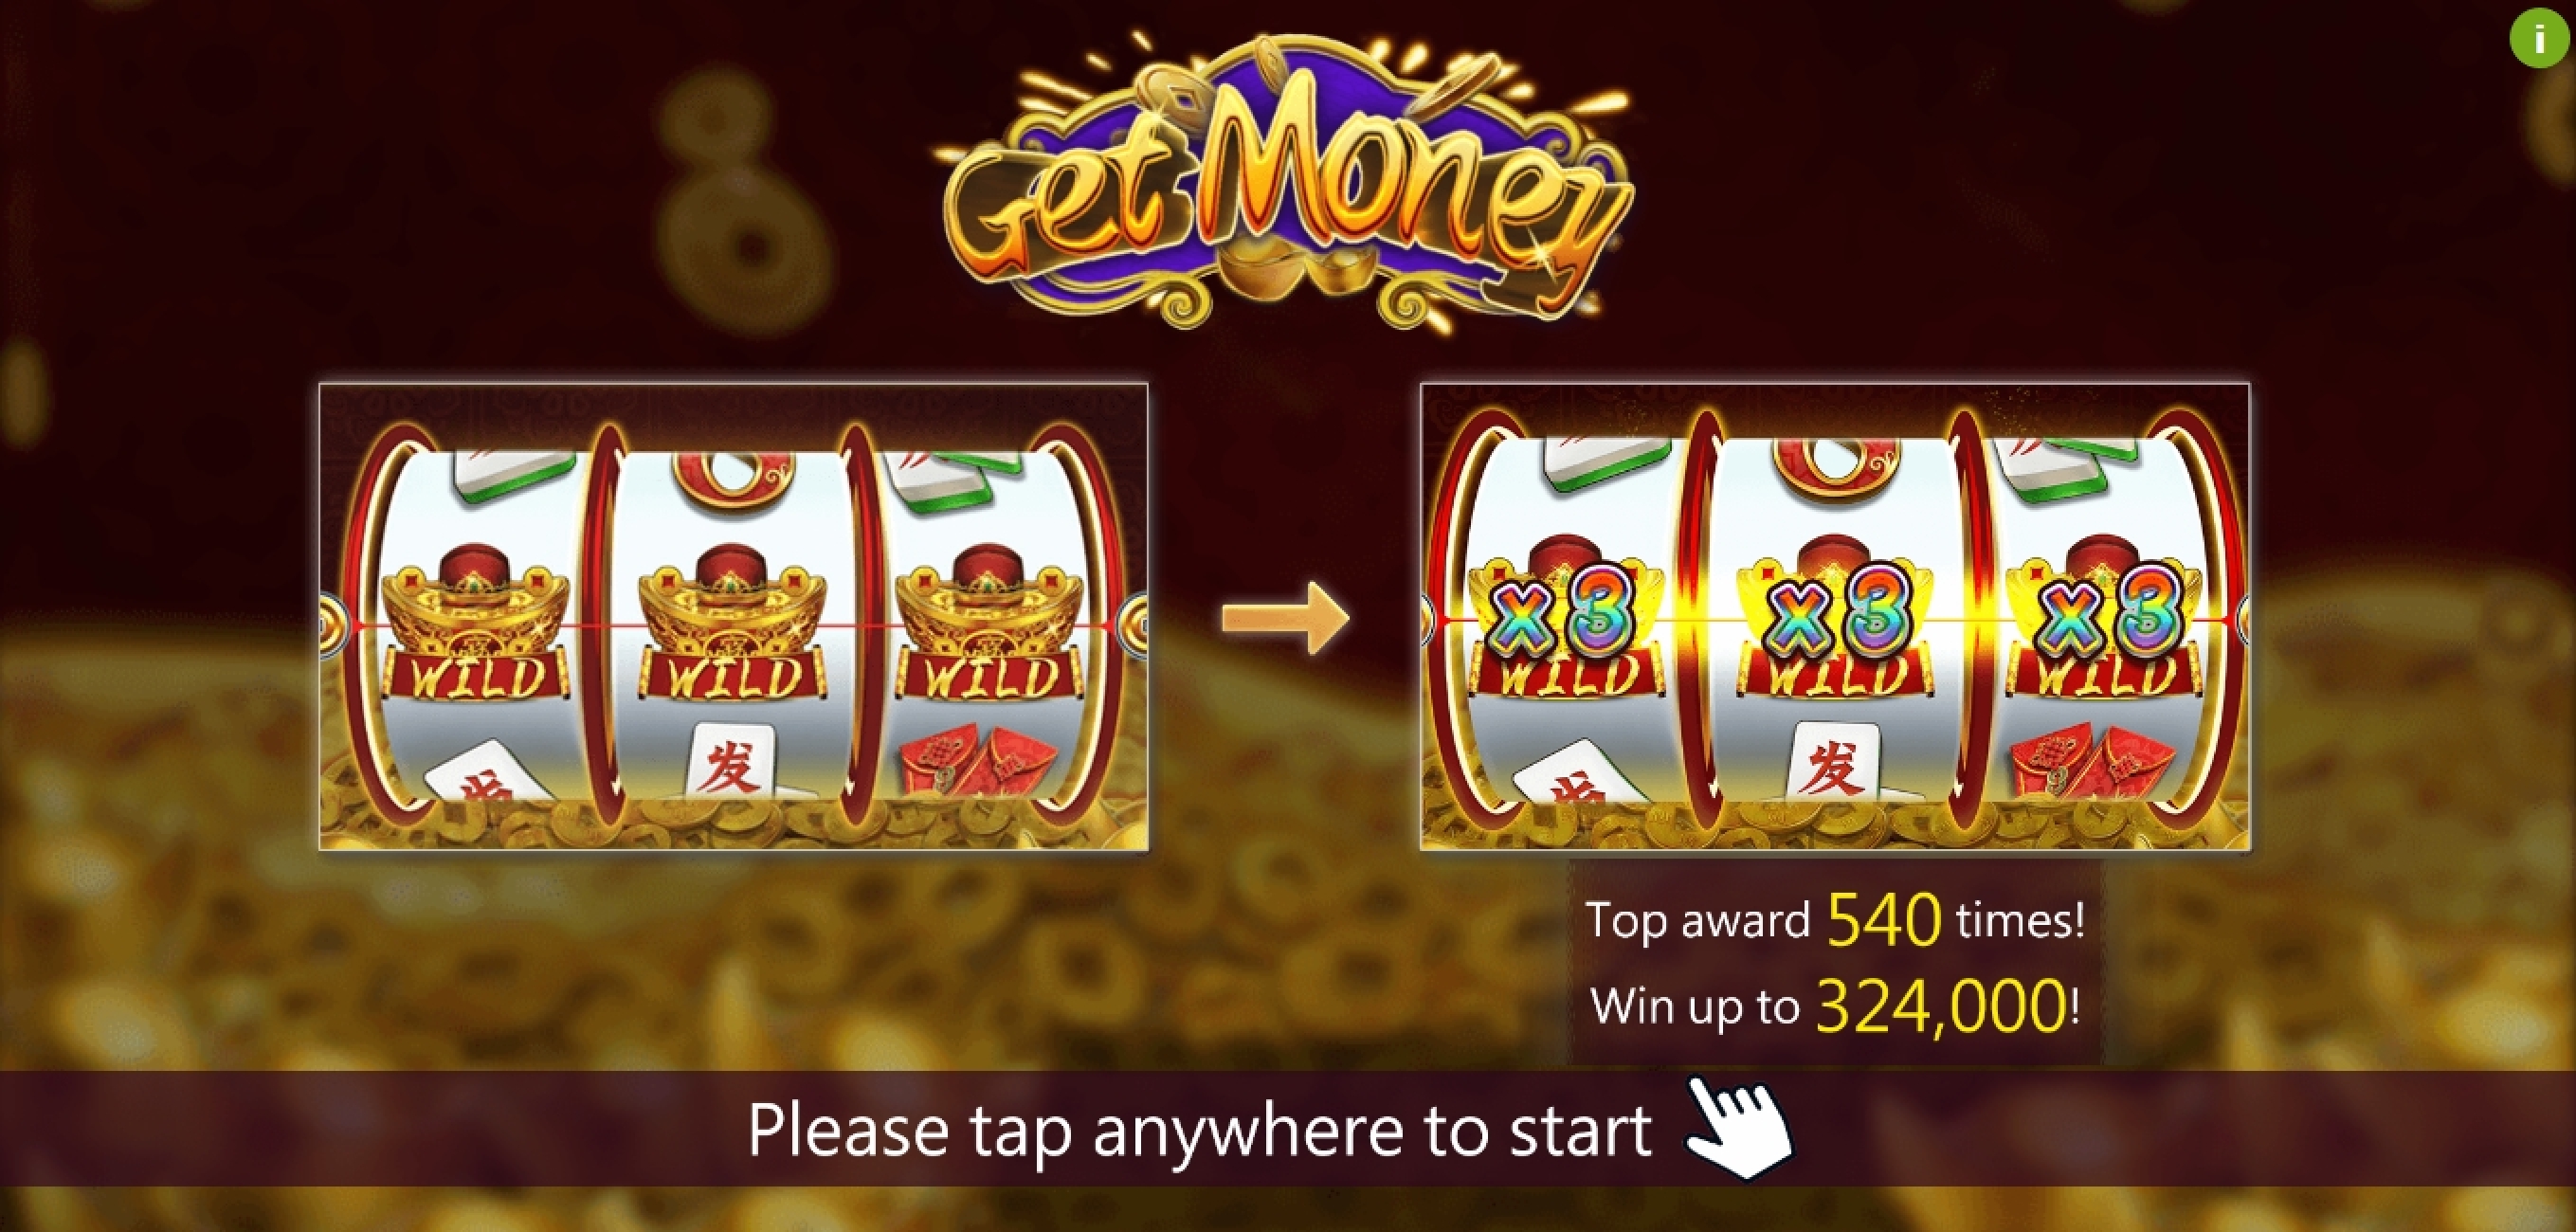 Play Get Money Free Casino Slot Game by Dragoon Soft